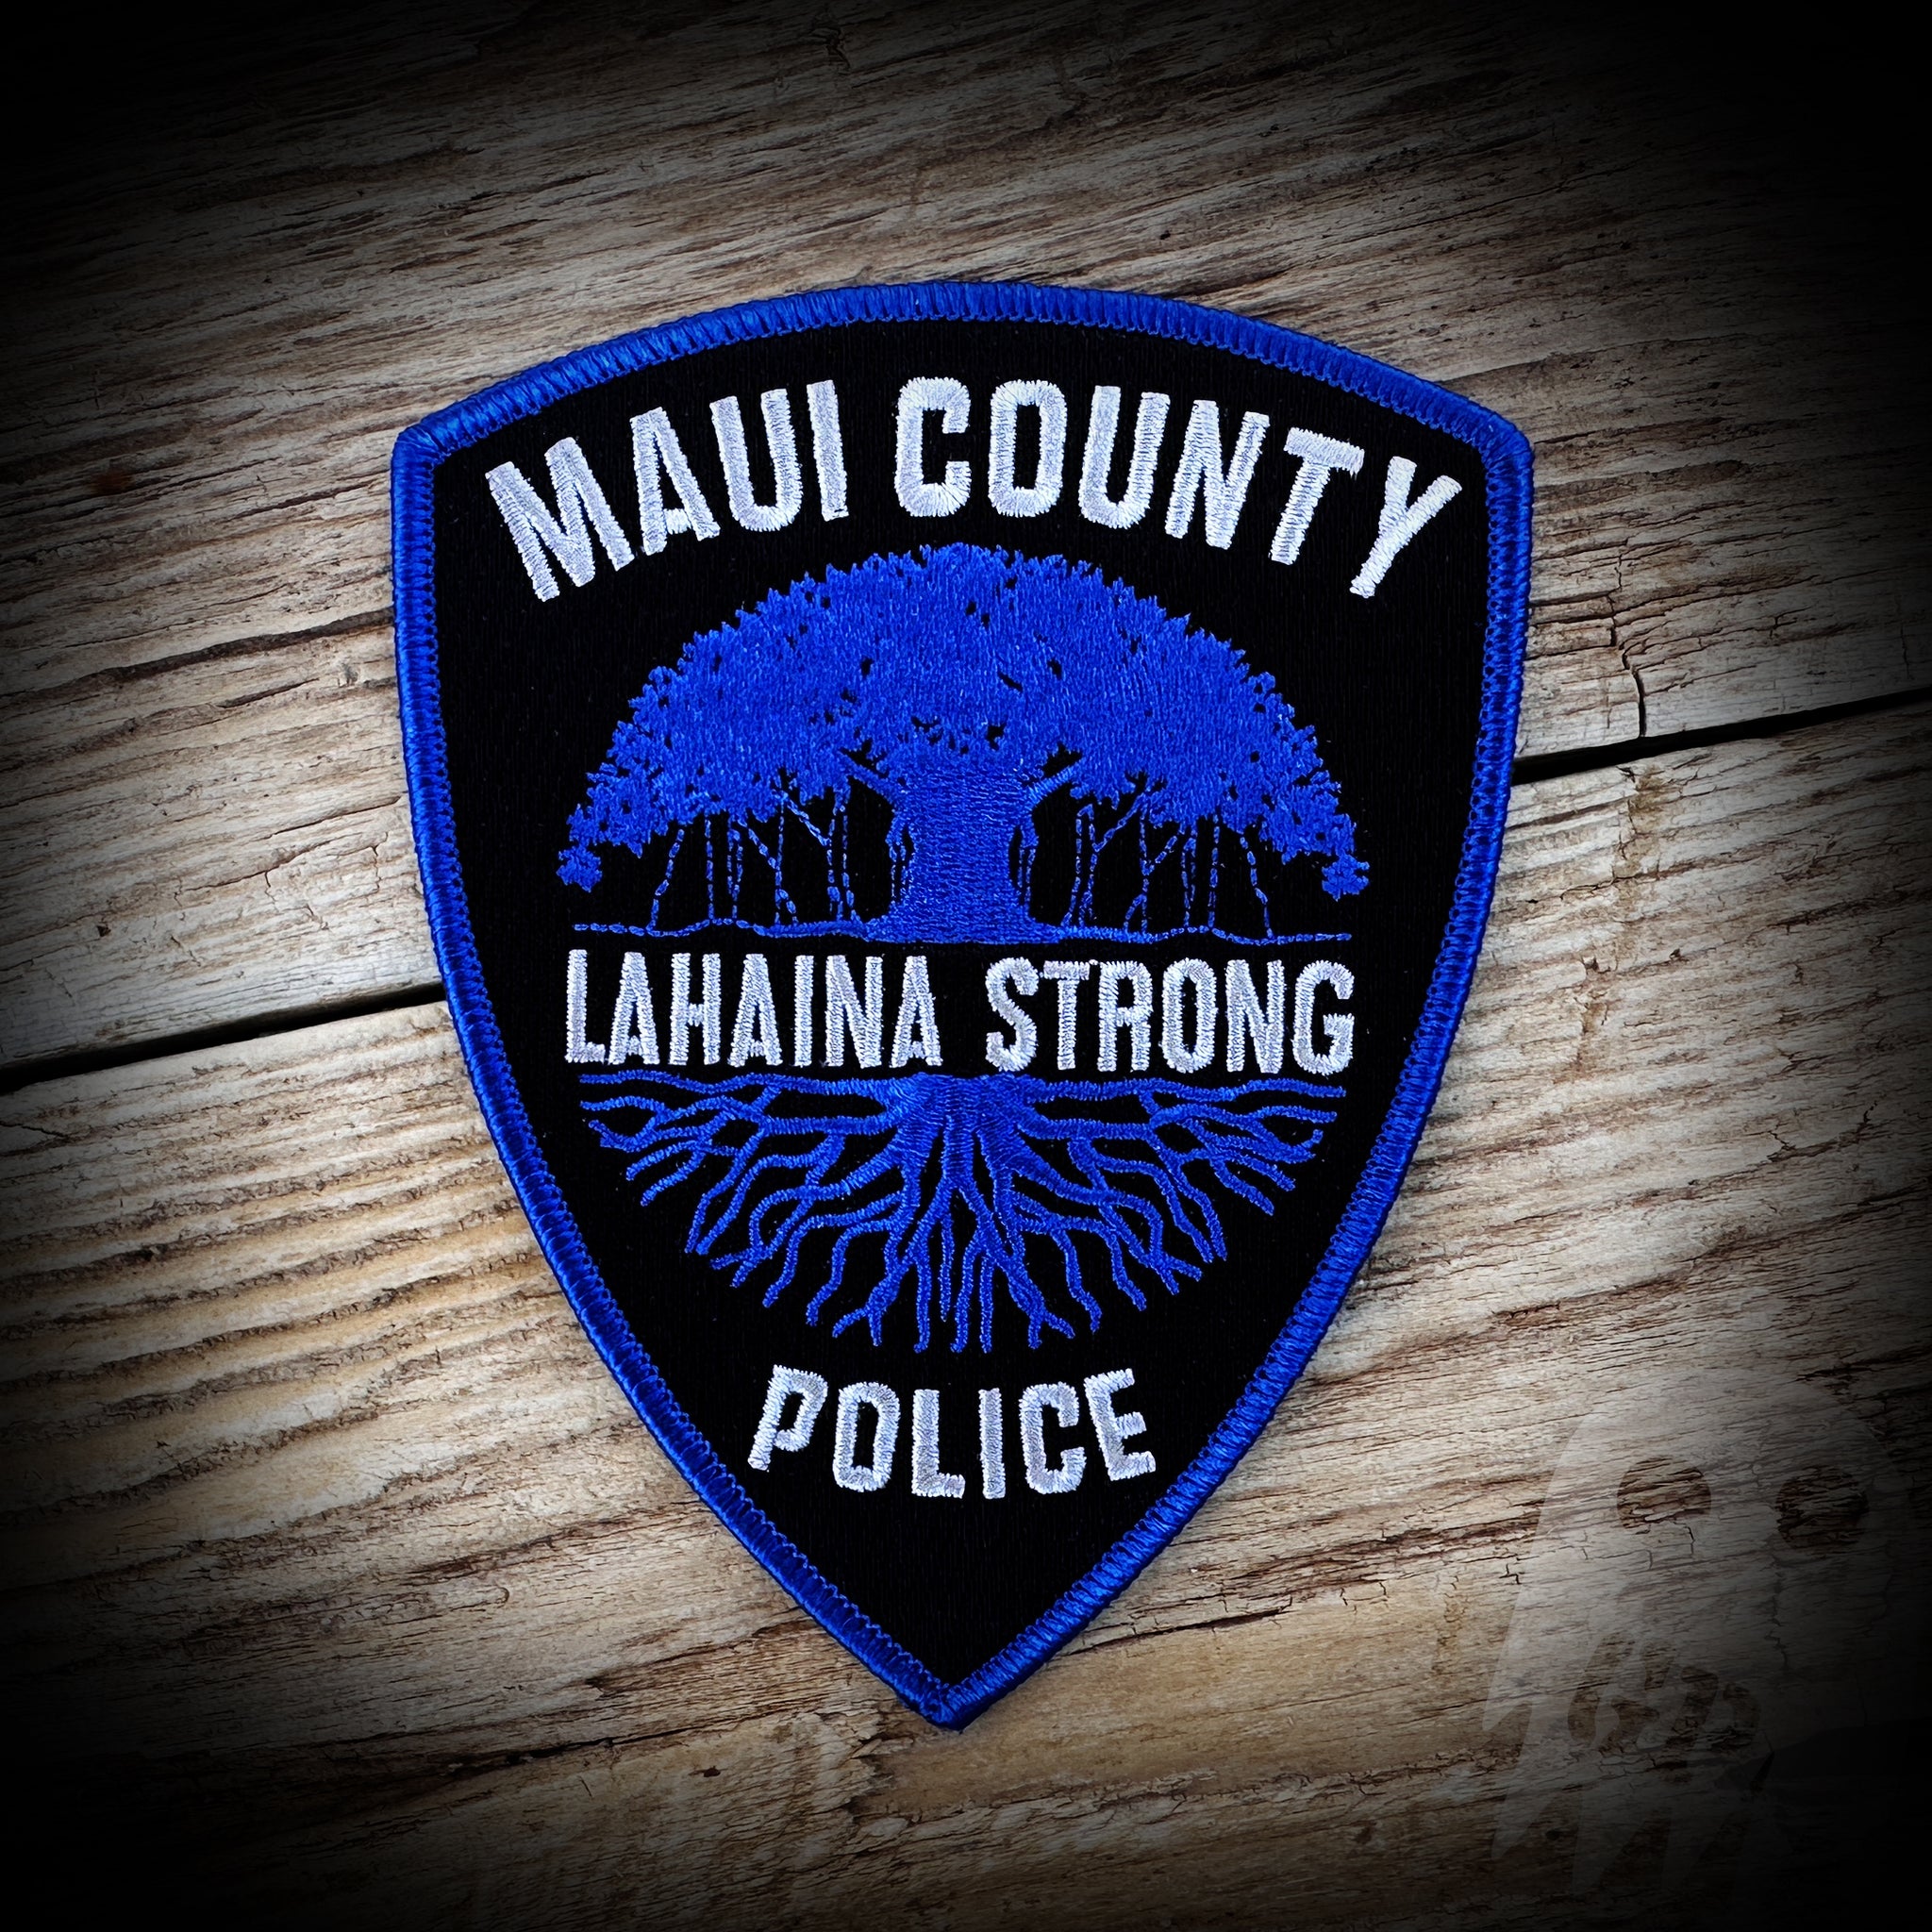 Maui County Police - Lahaina Strong Patch - Fundraiser